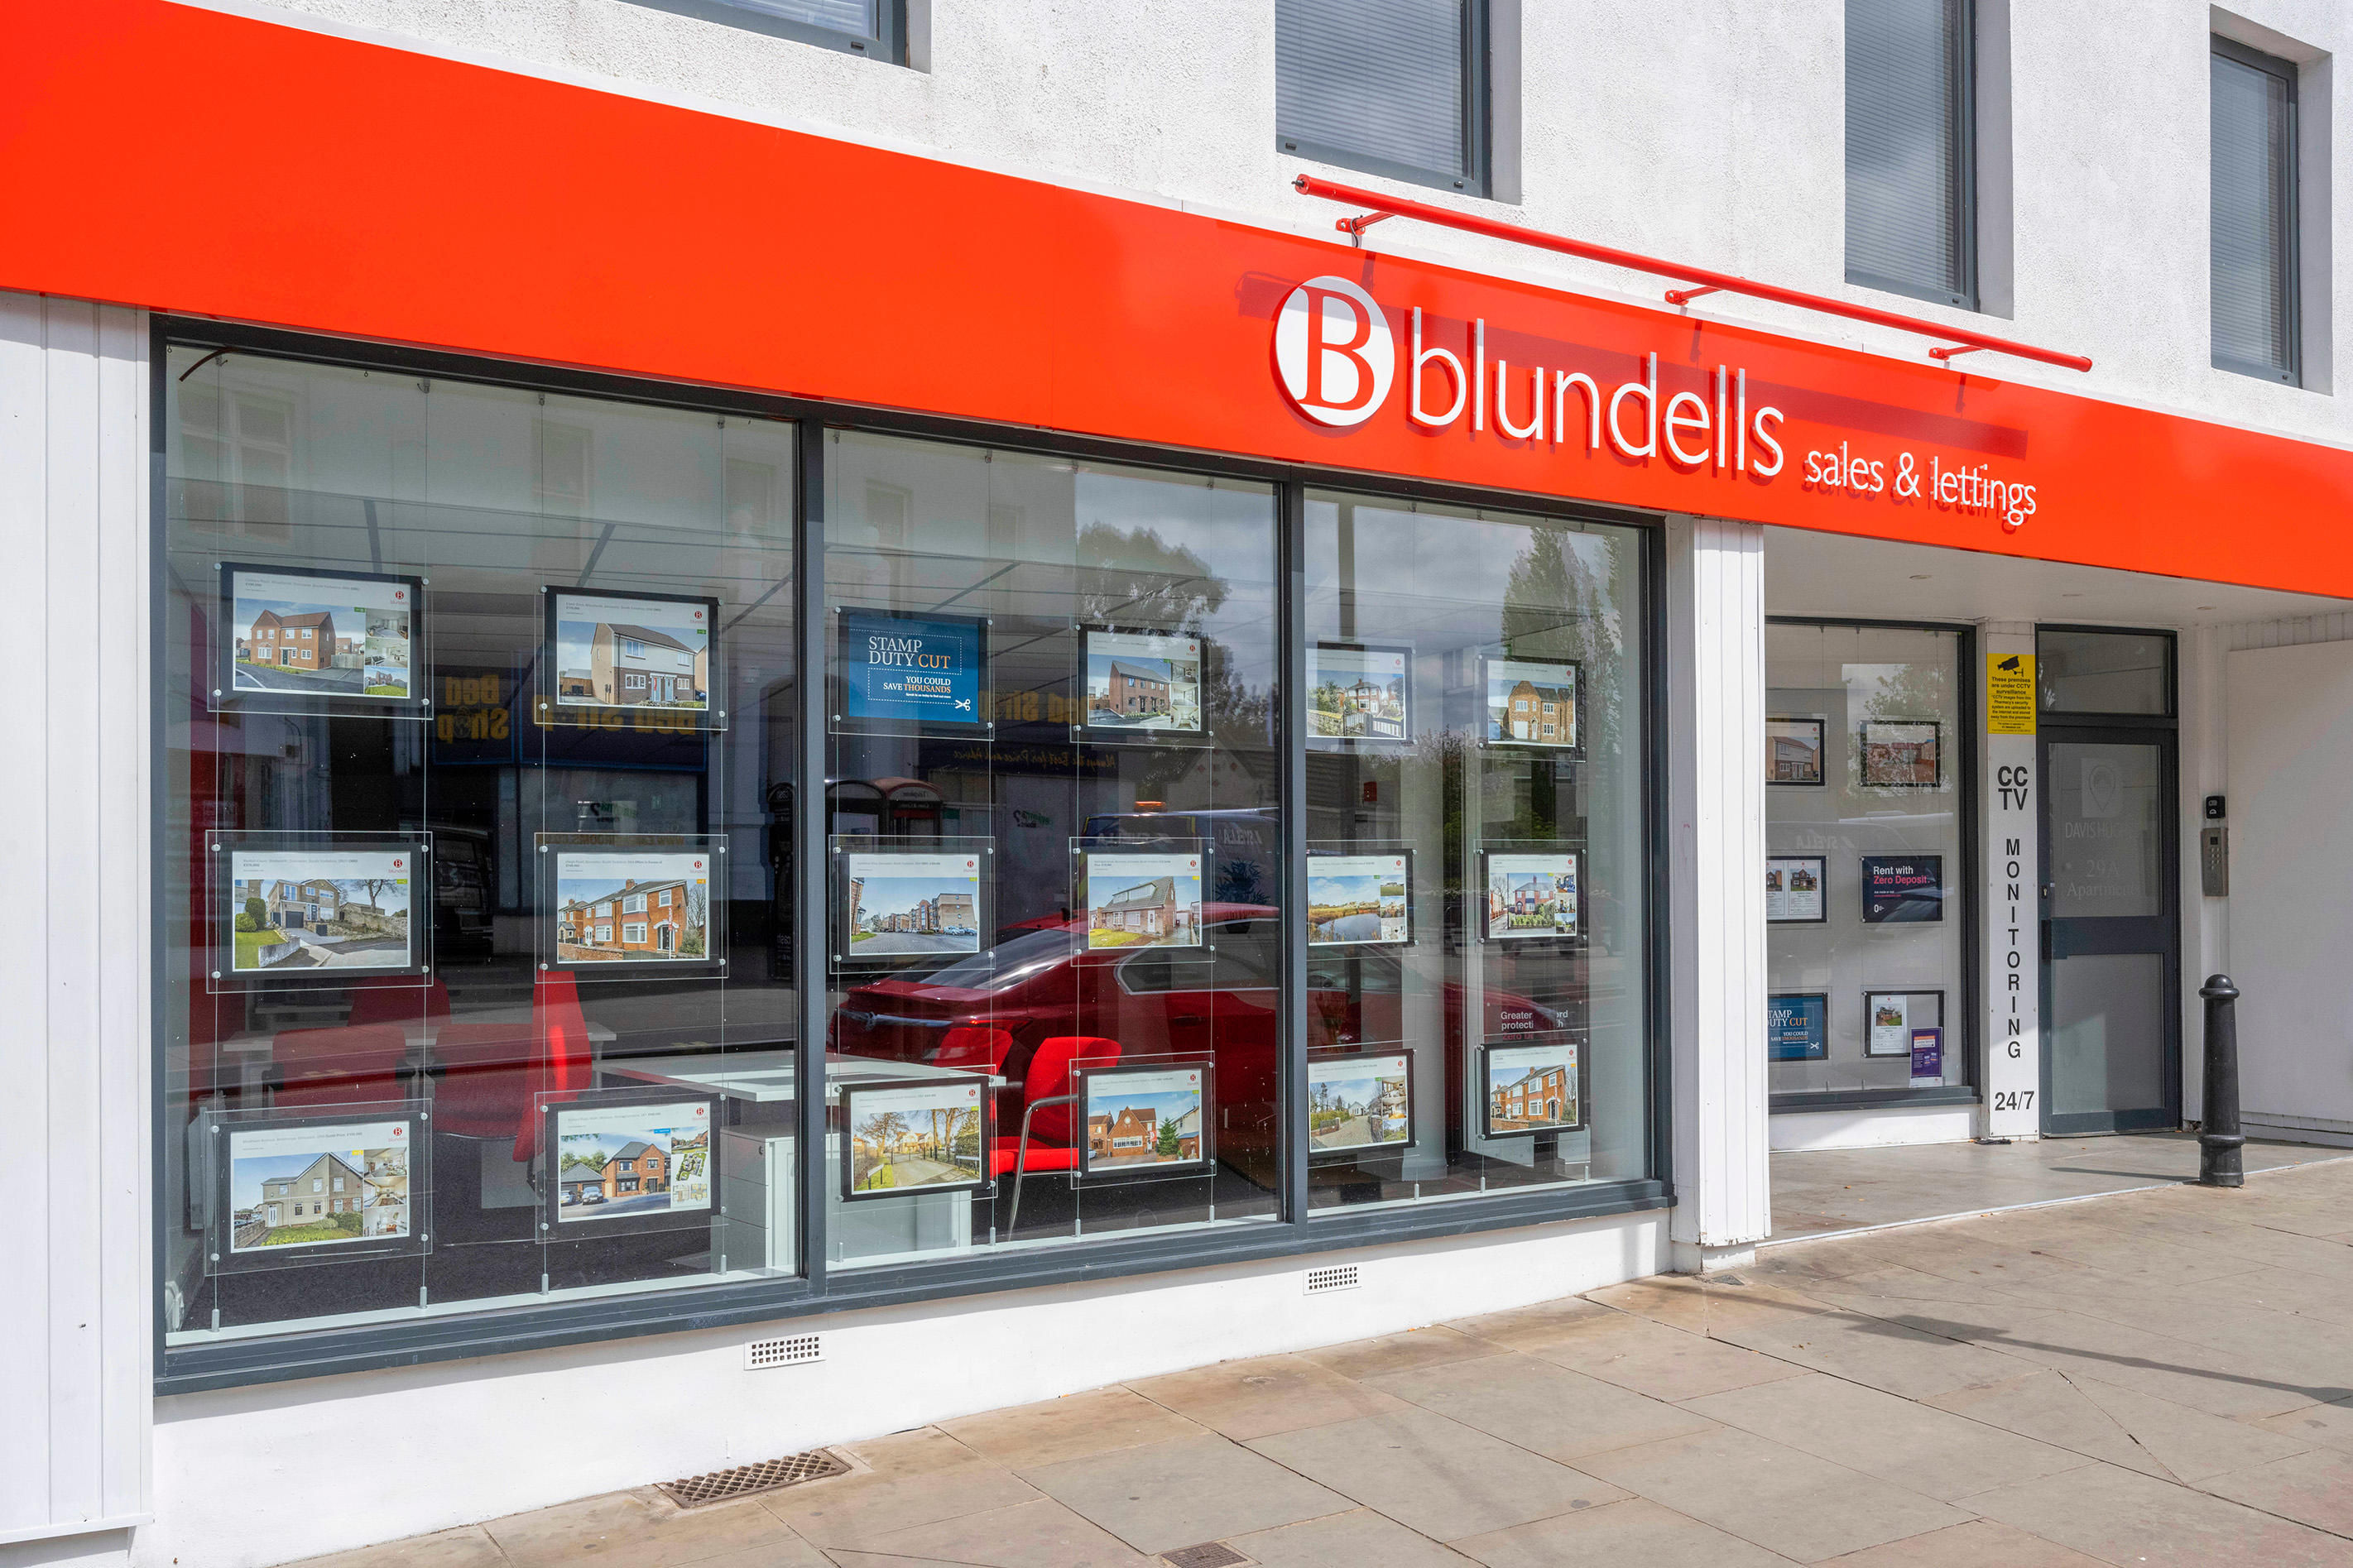 Blundells Sales and Letting Agents Doncaster Doncaster 01302 460122